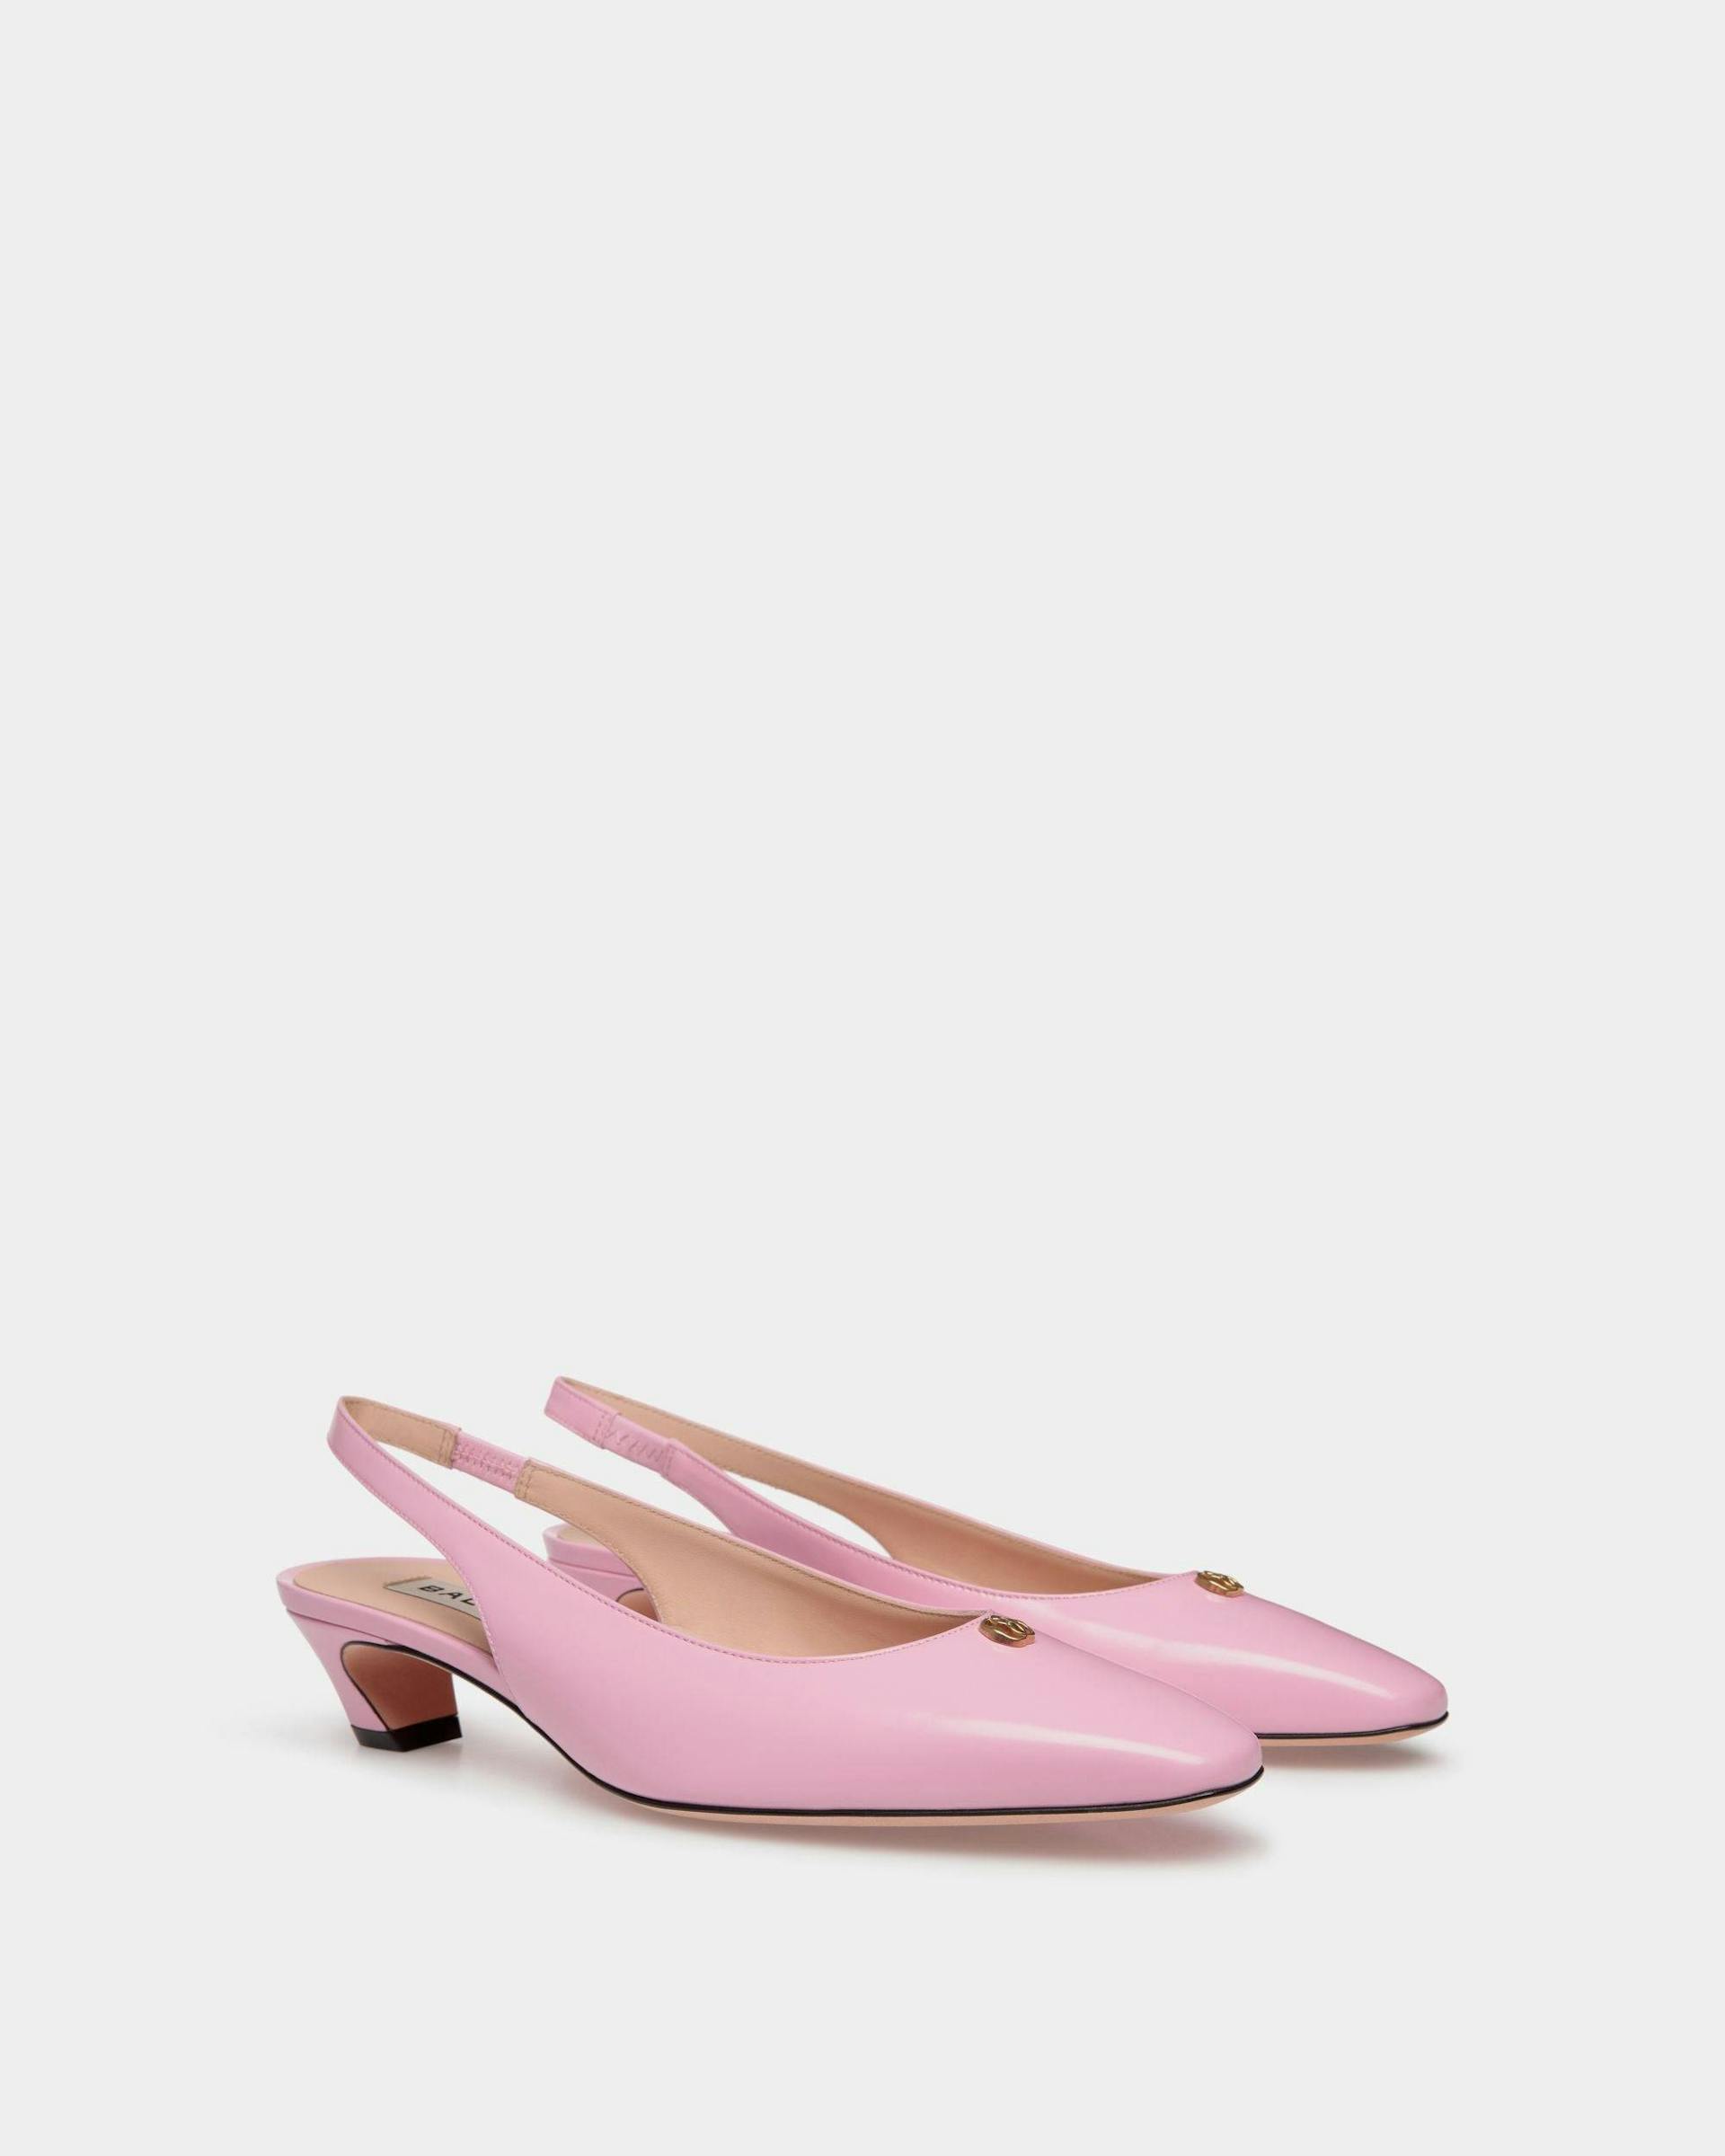 Women's Sylt Slingback Pump In Pink Leather | Bally | Still Life 3/4 Front